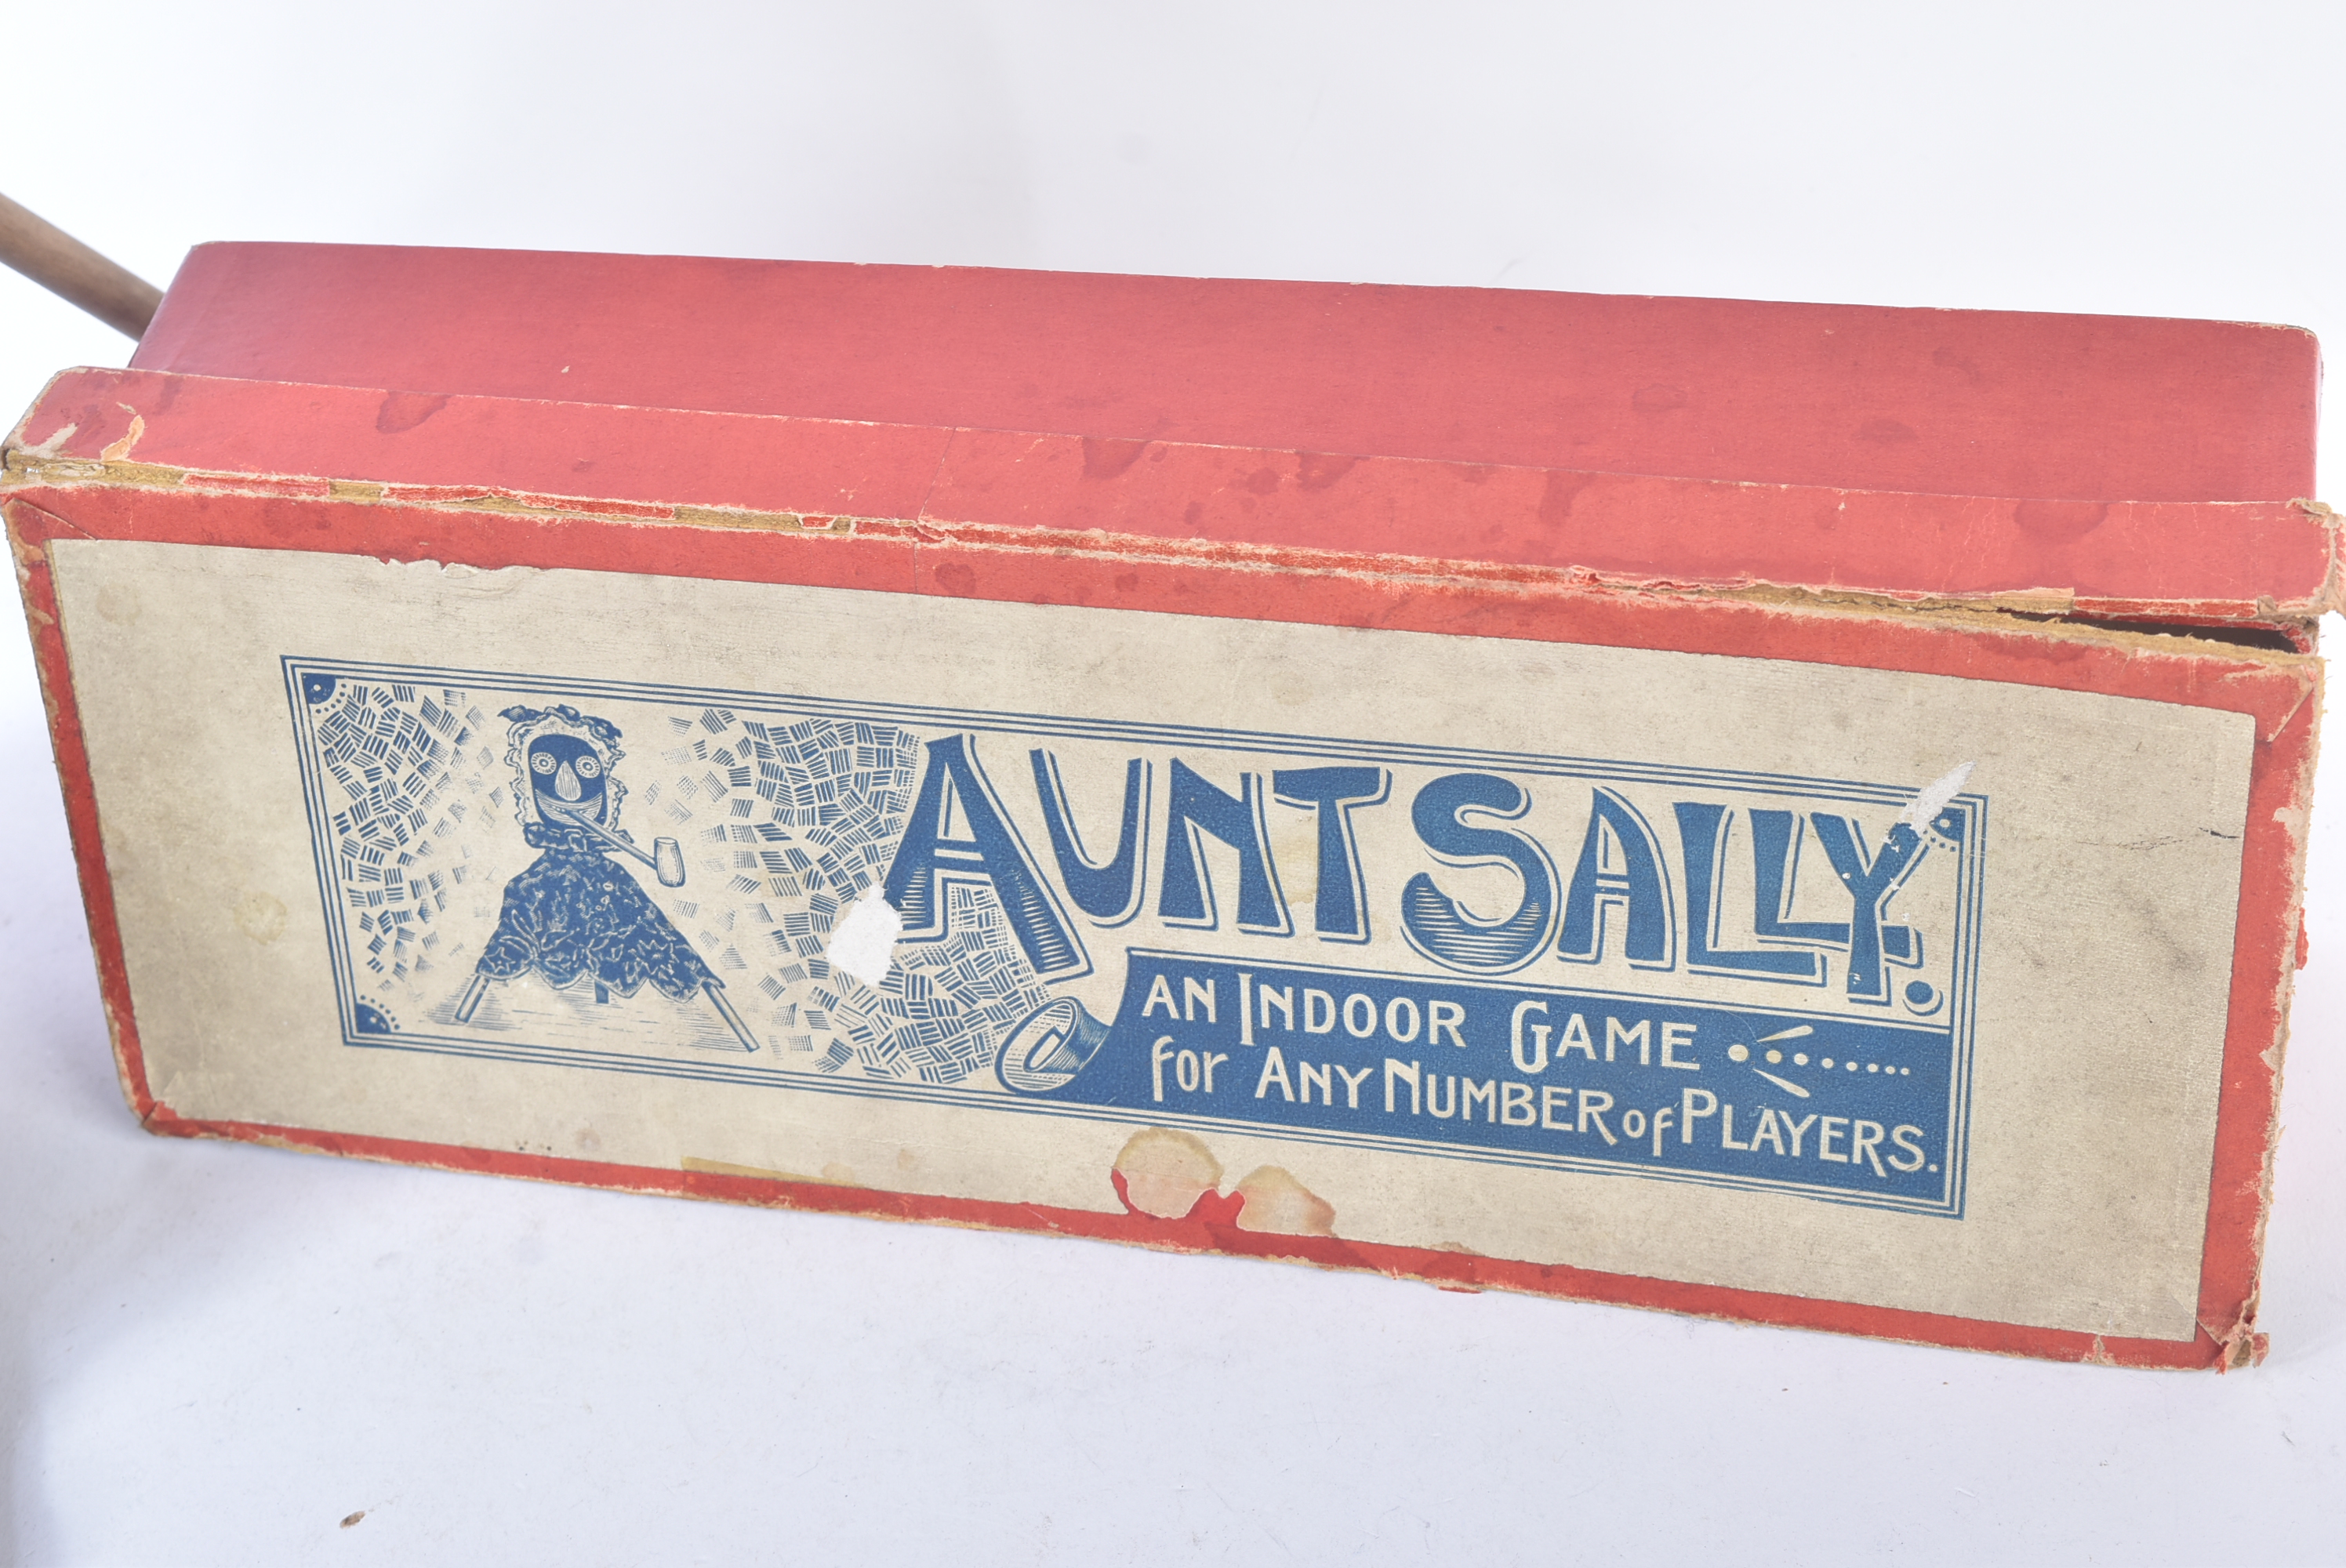 EARLY 20TH CENTURY AUNT SALLY PARLOUR GAME - Image 4 of 5